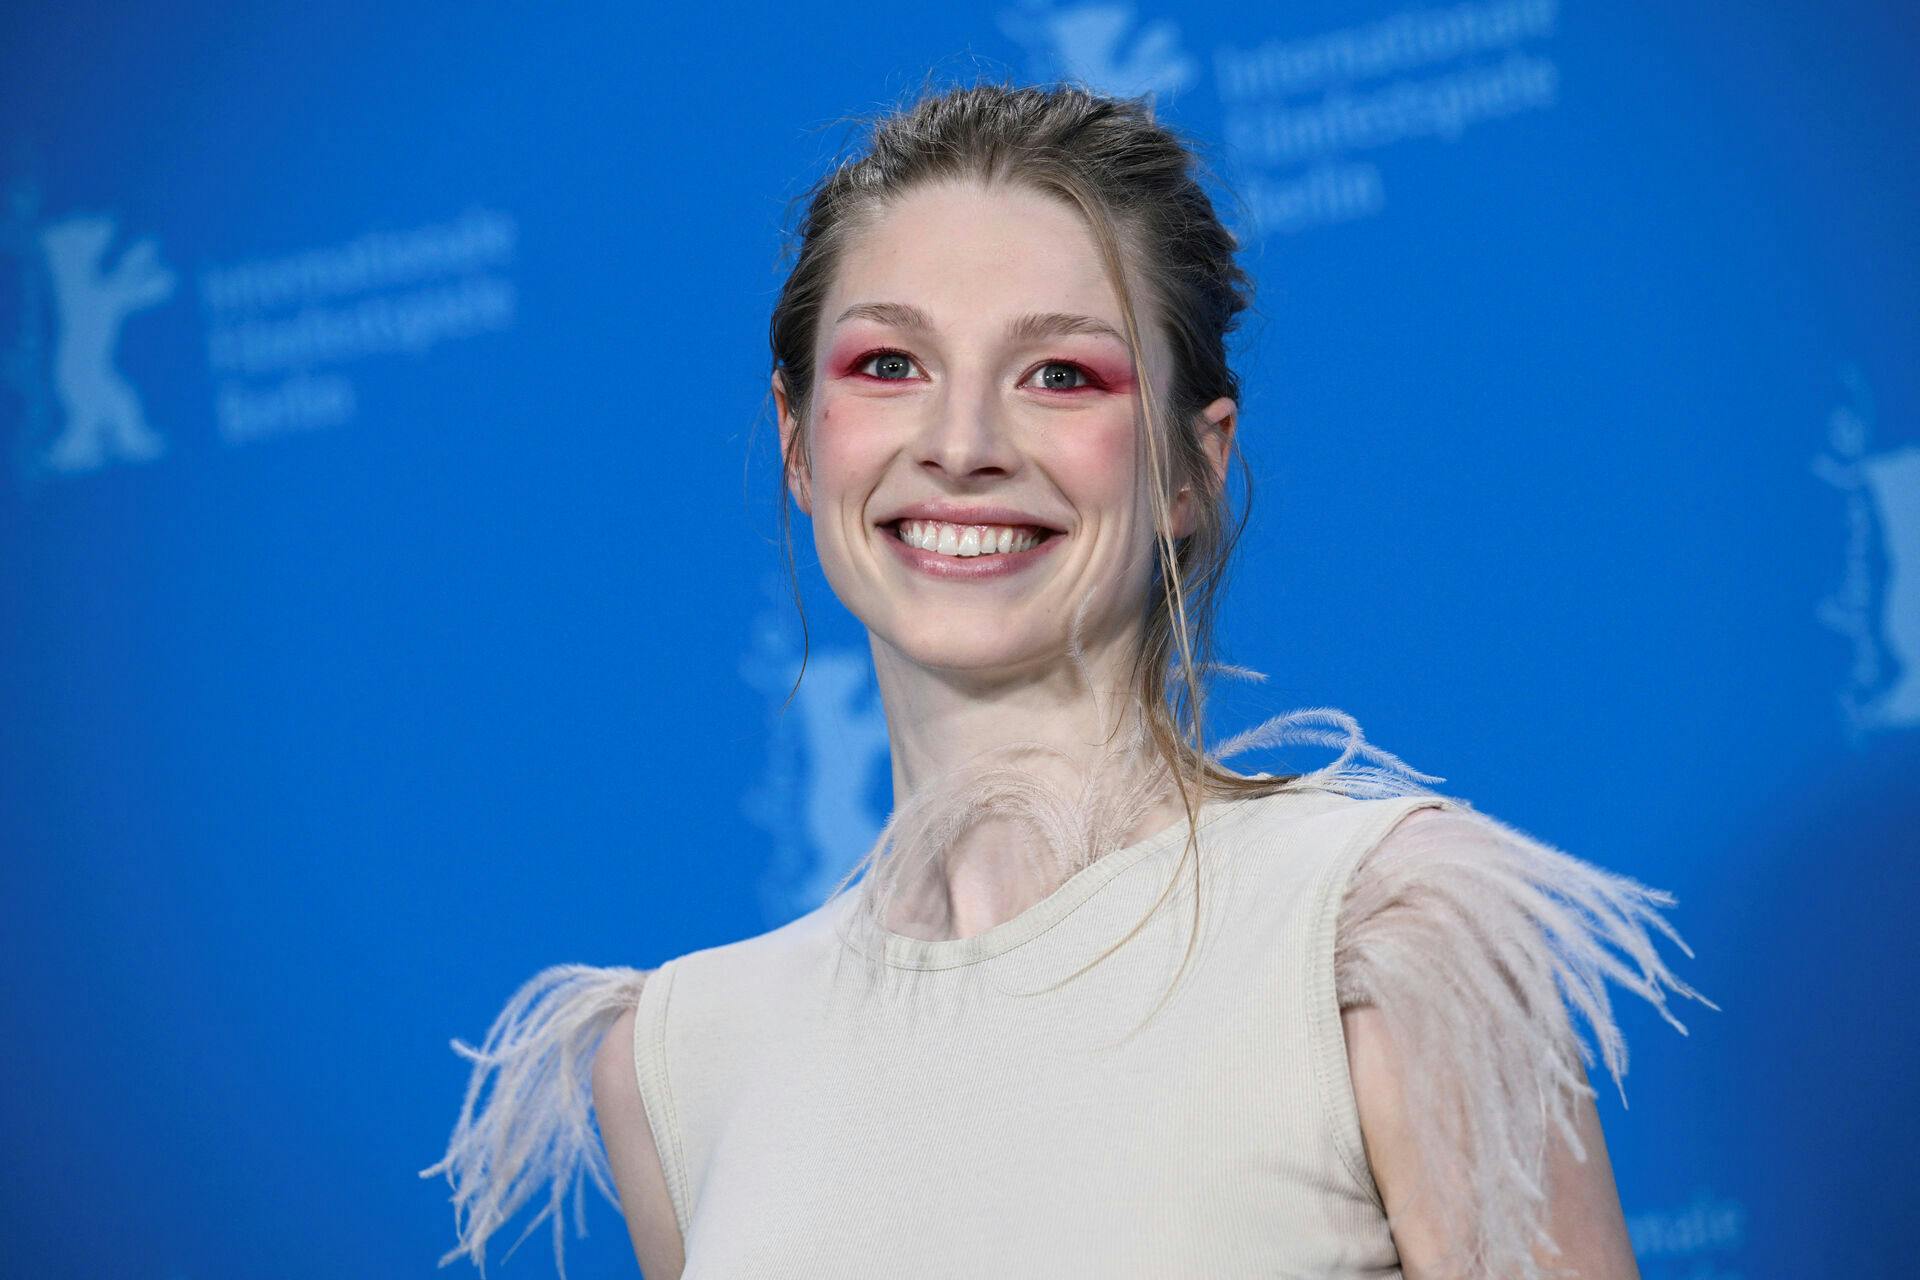 Cast member Hunter Schafer attends a photocall to promote the movie "Cuckoo" at the 74th Berlinale International Film Festival in Berlin, Germany, February 16, 2024. REUTERS/Annegret Hilse